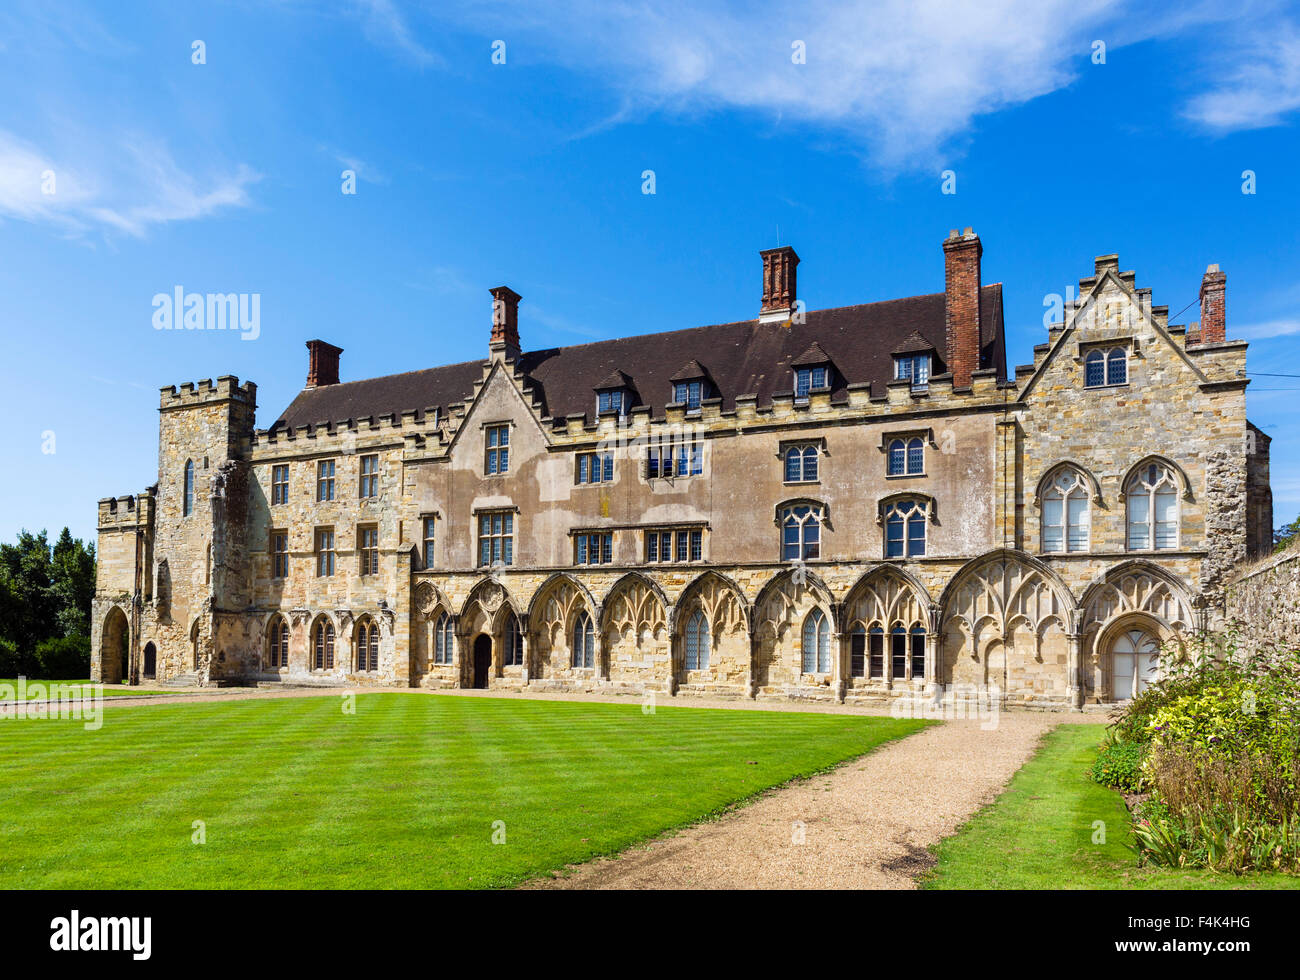 The Abbot's Great Hall at Battle Abbey, now a school, 1066 Battle of Hastings Abbey and Battlefield, East Sussex England, UK Stock Photo